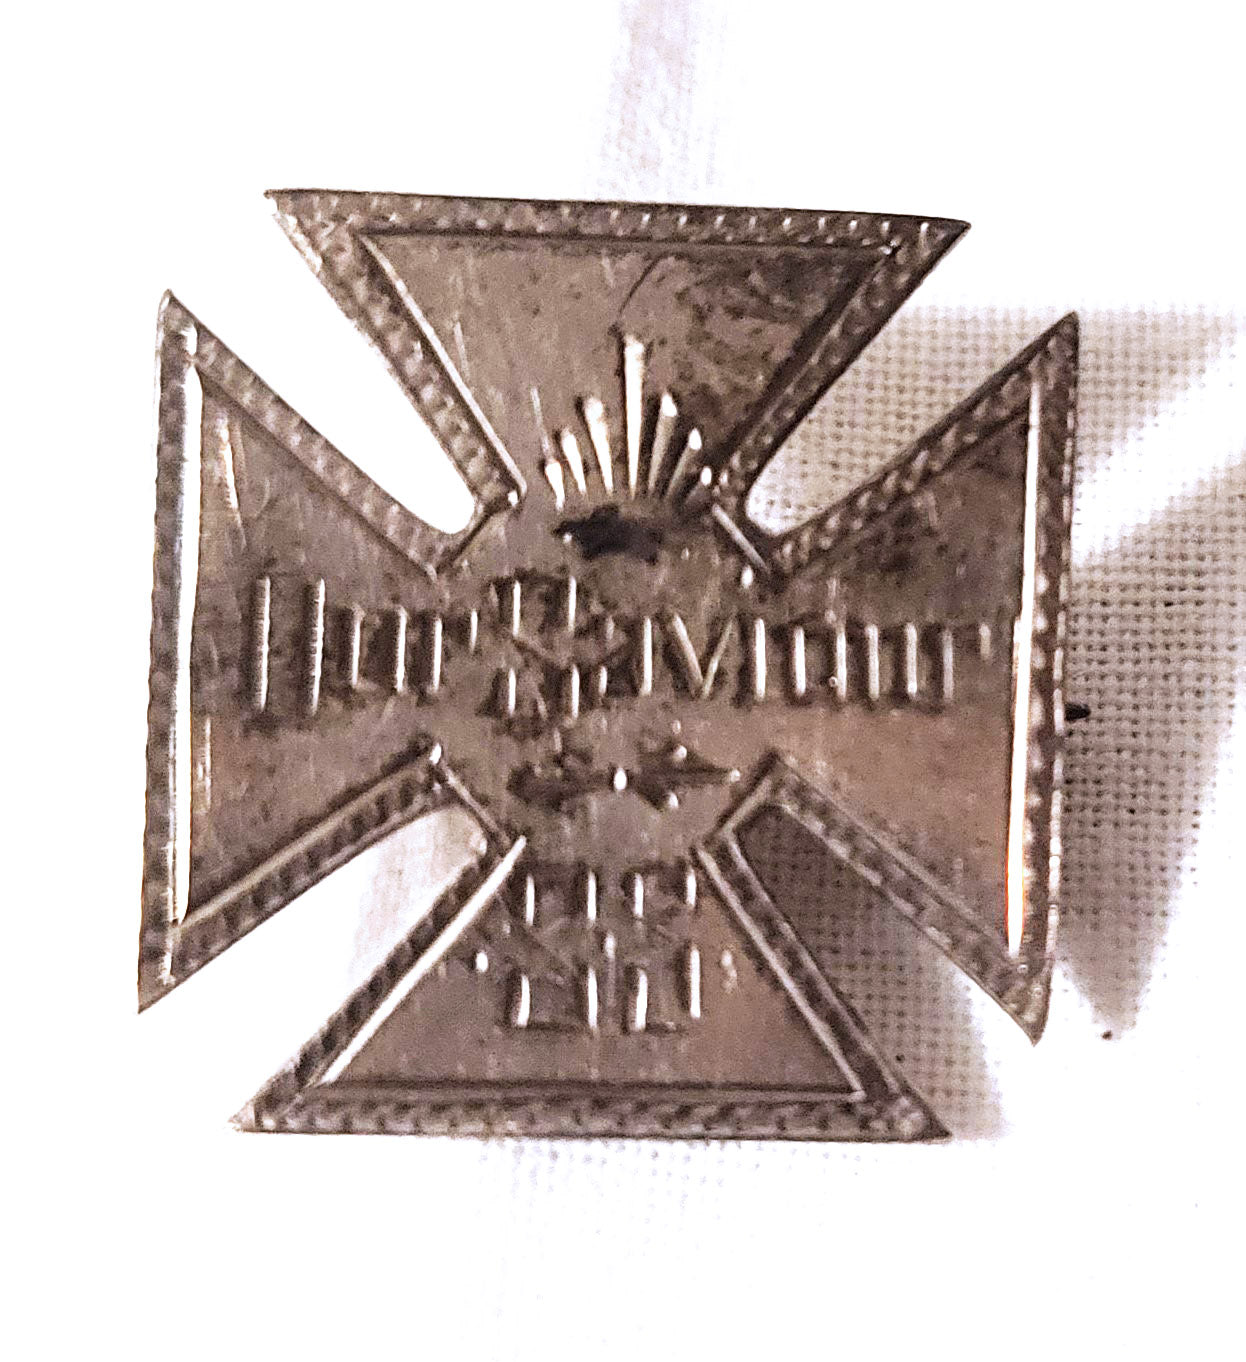 An antique Sunday School cross pin, with "Our Savior" engraved on the front of it. On the back, the name "Louis Fogelson" is engraved. Front view.